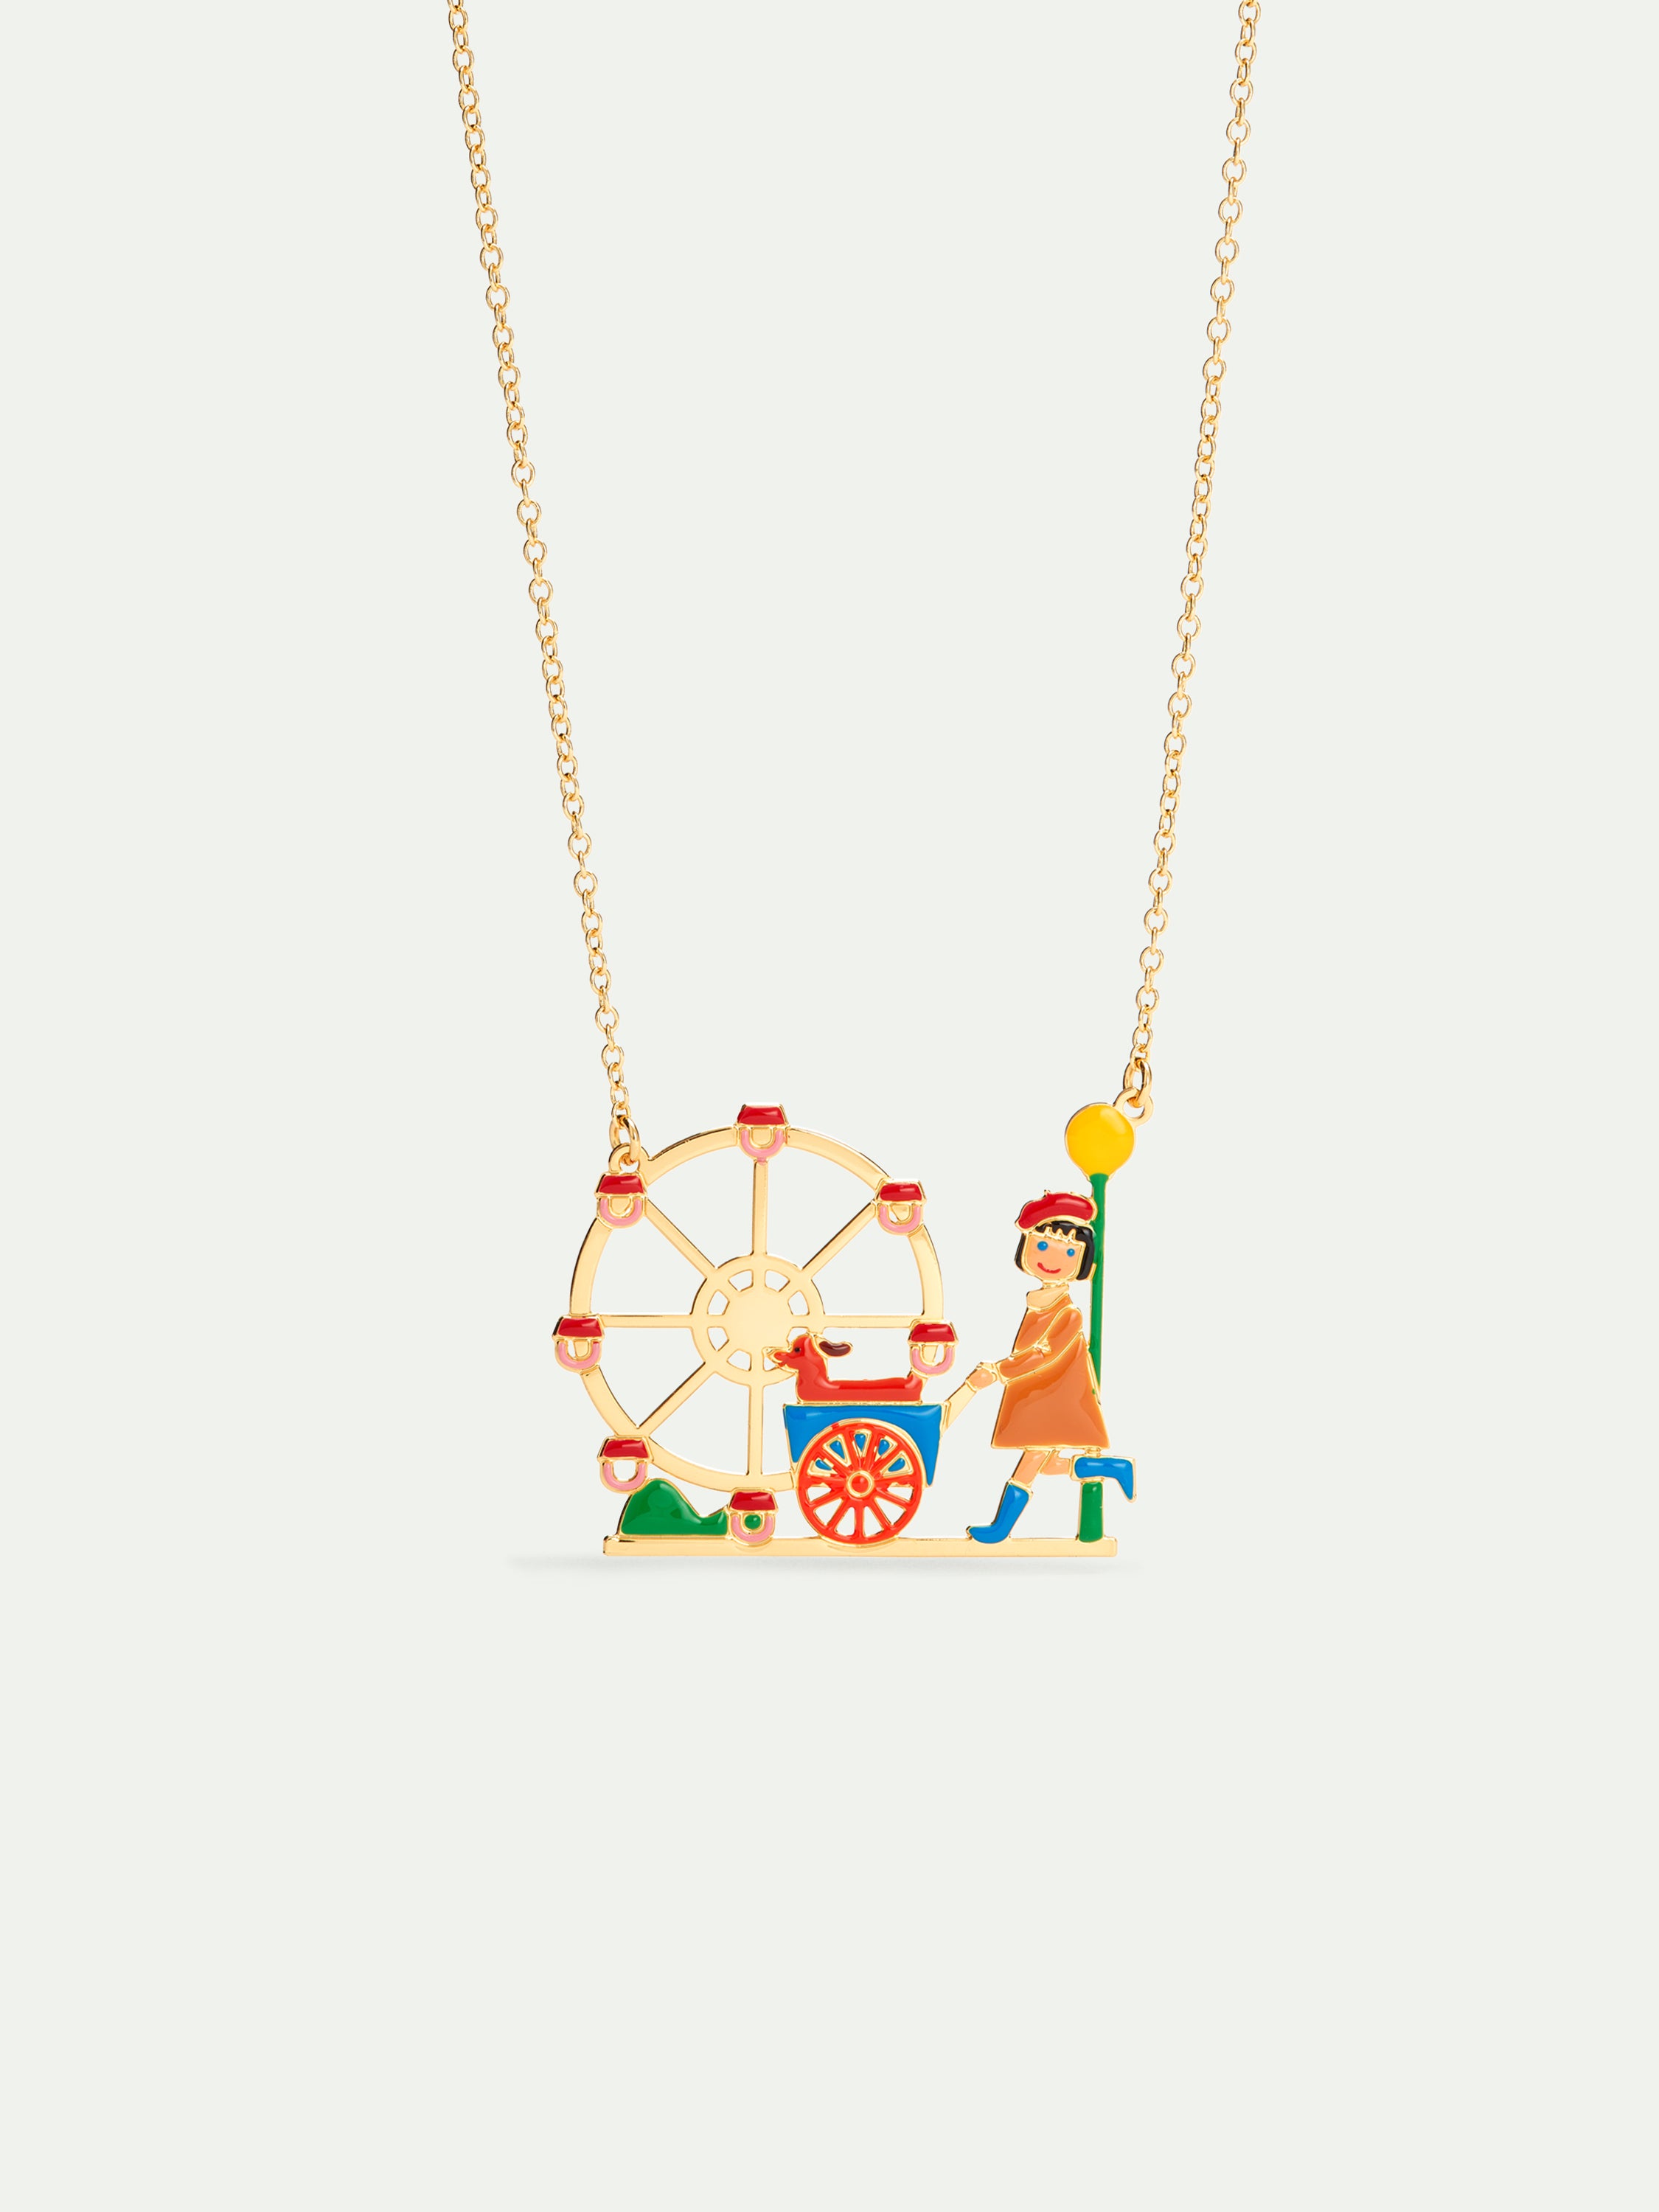 Little girl and dachshund at the funfair statement necklace